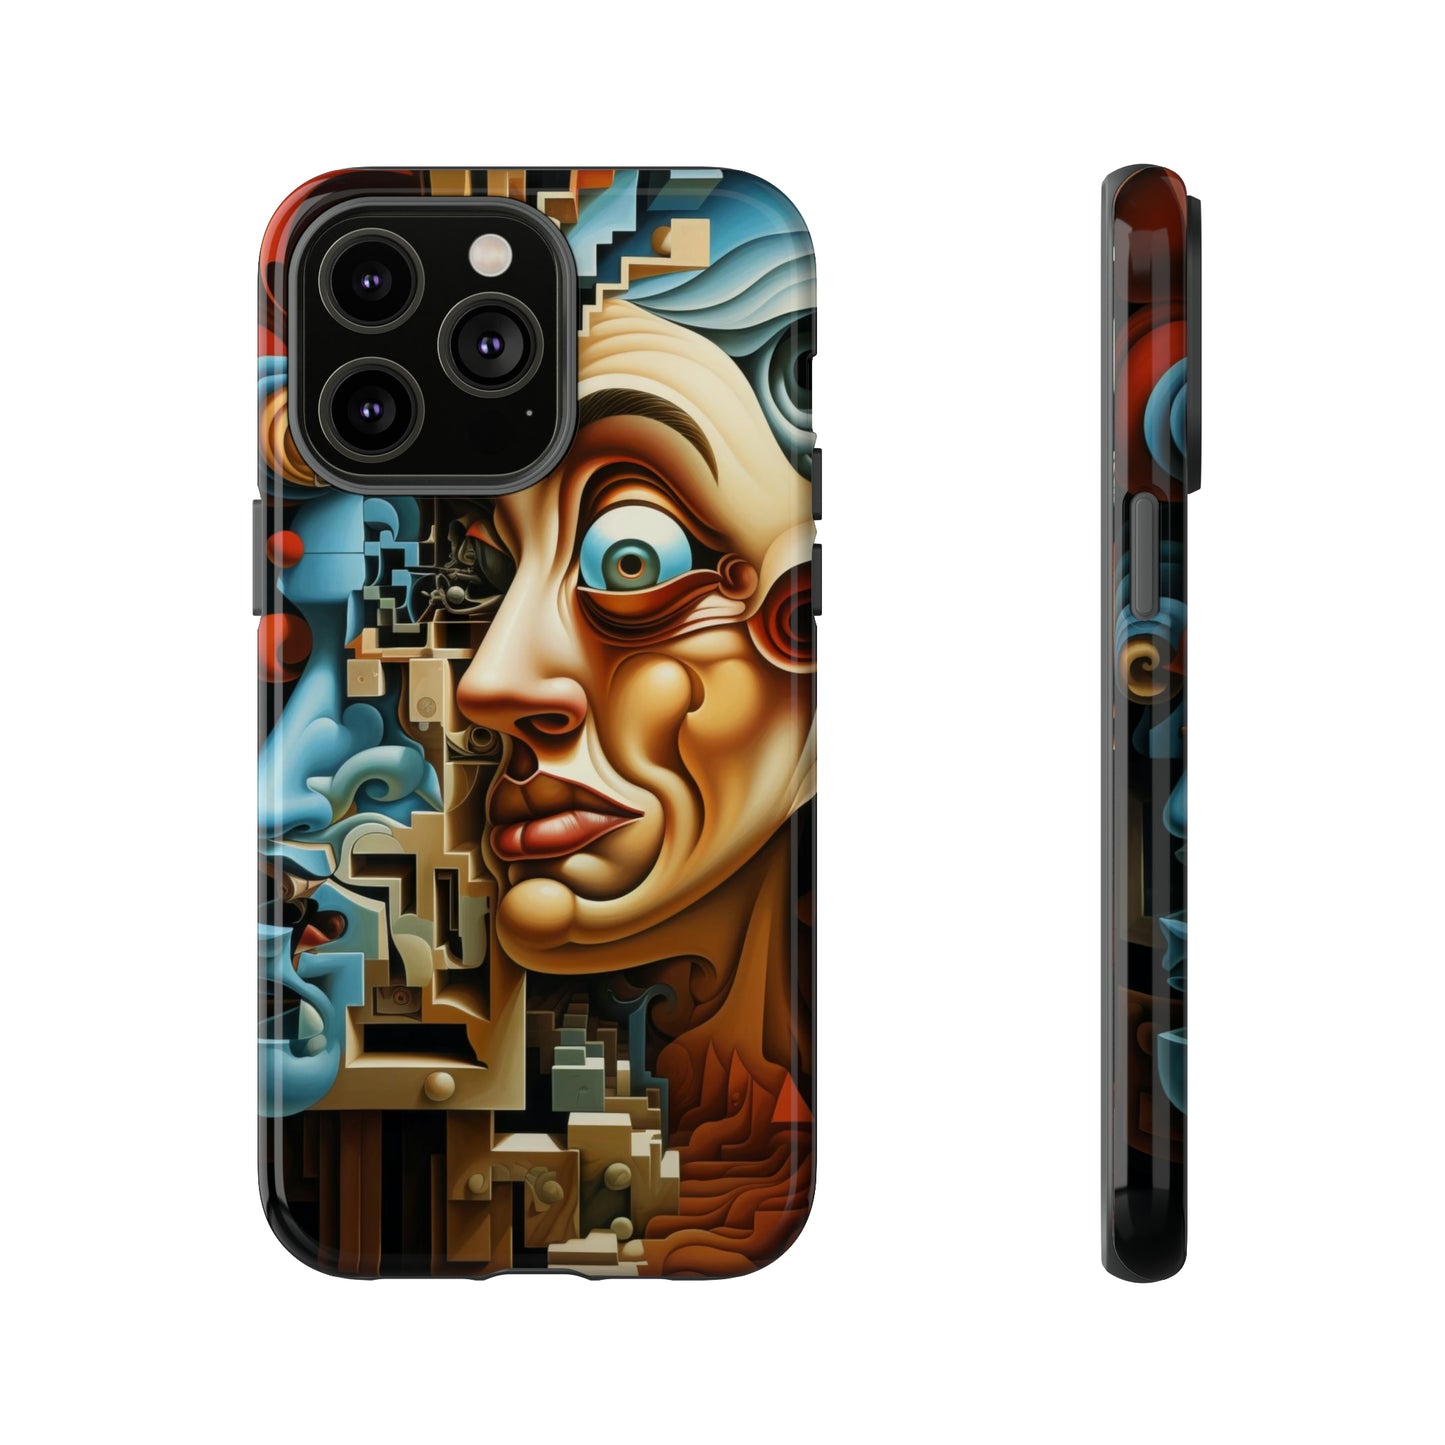 Realities Folded: Surreal Face Fusion Phone Case for iPhone, Samsung, Pixel